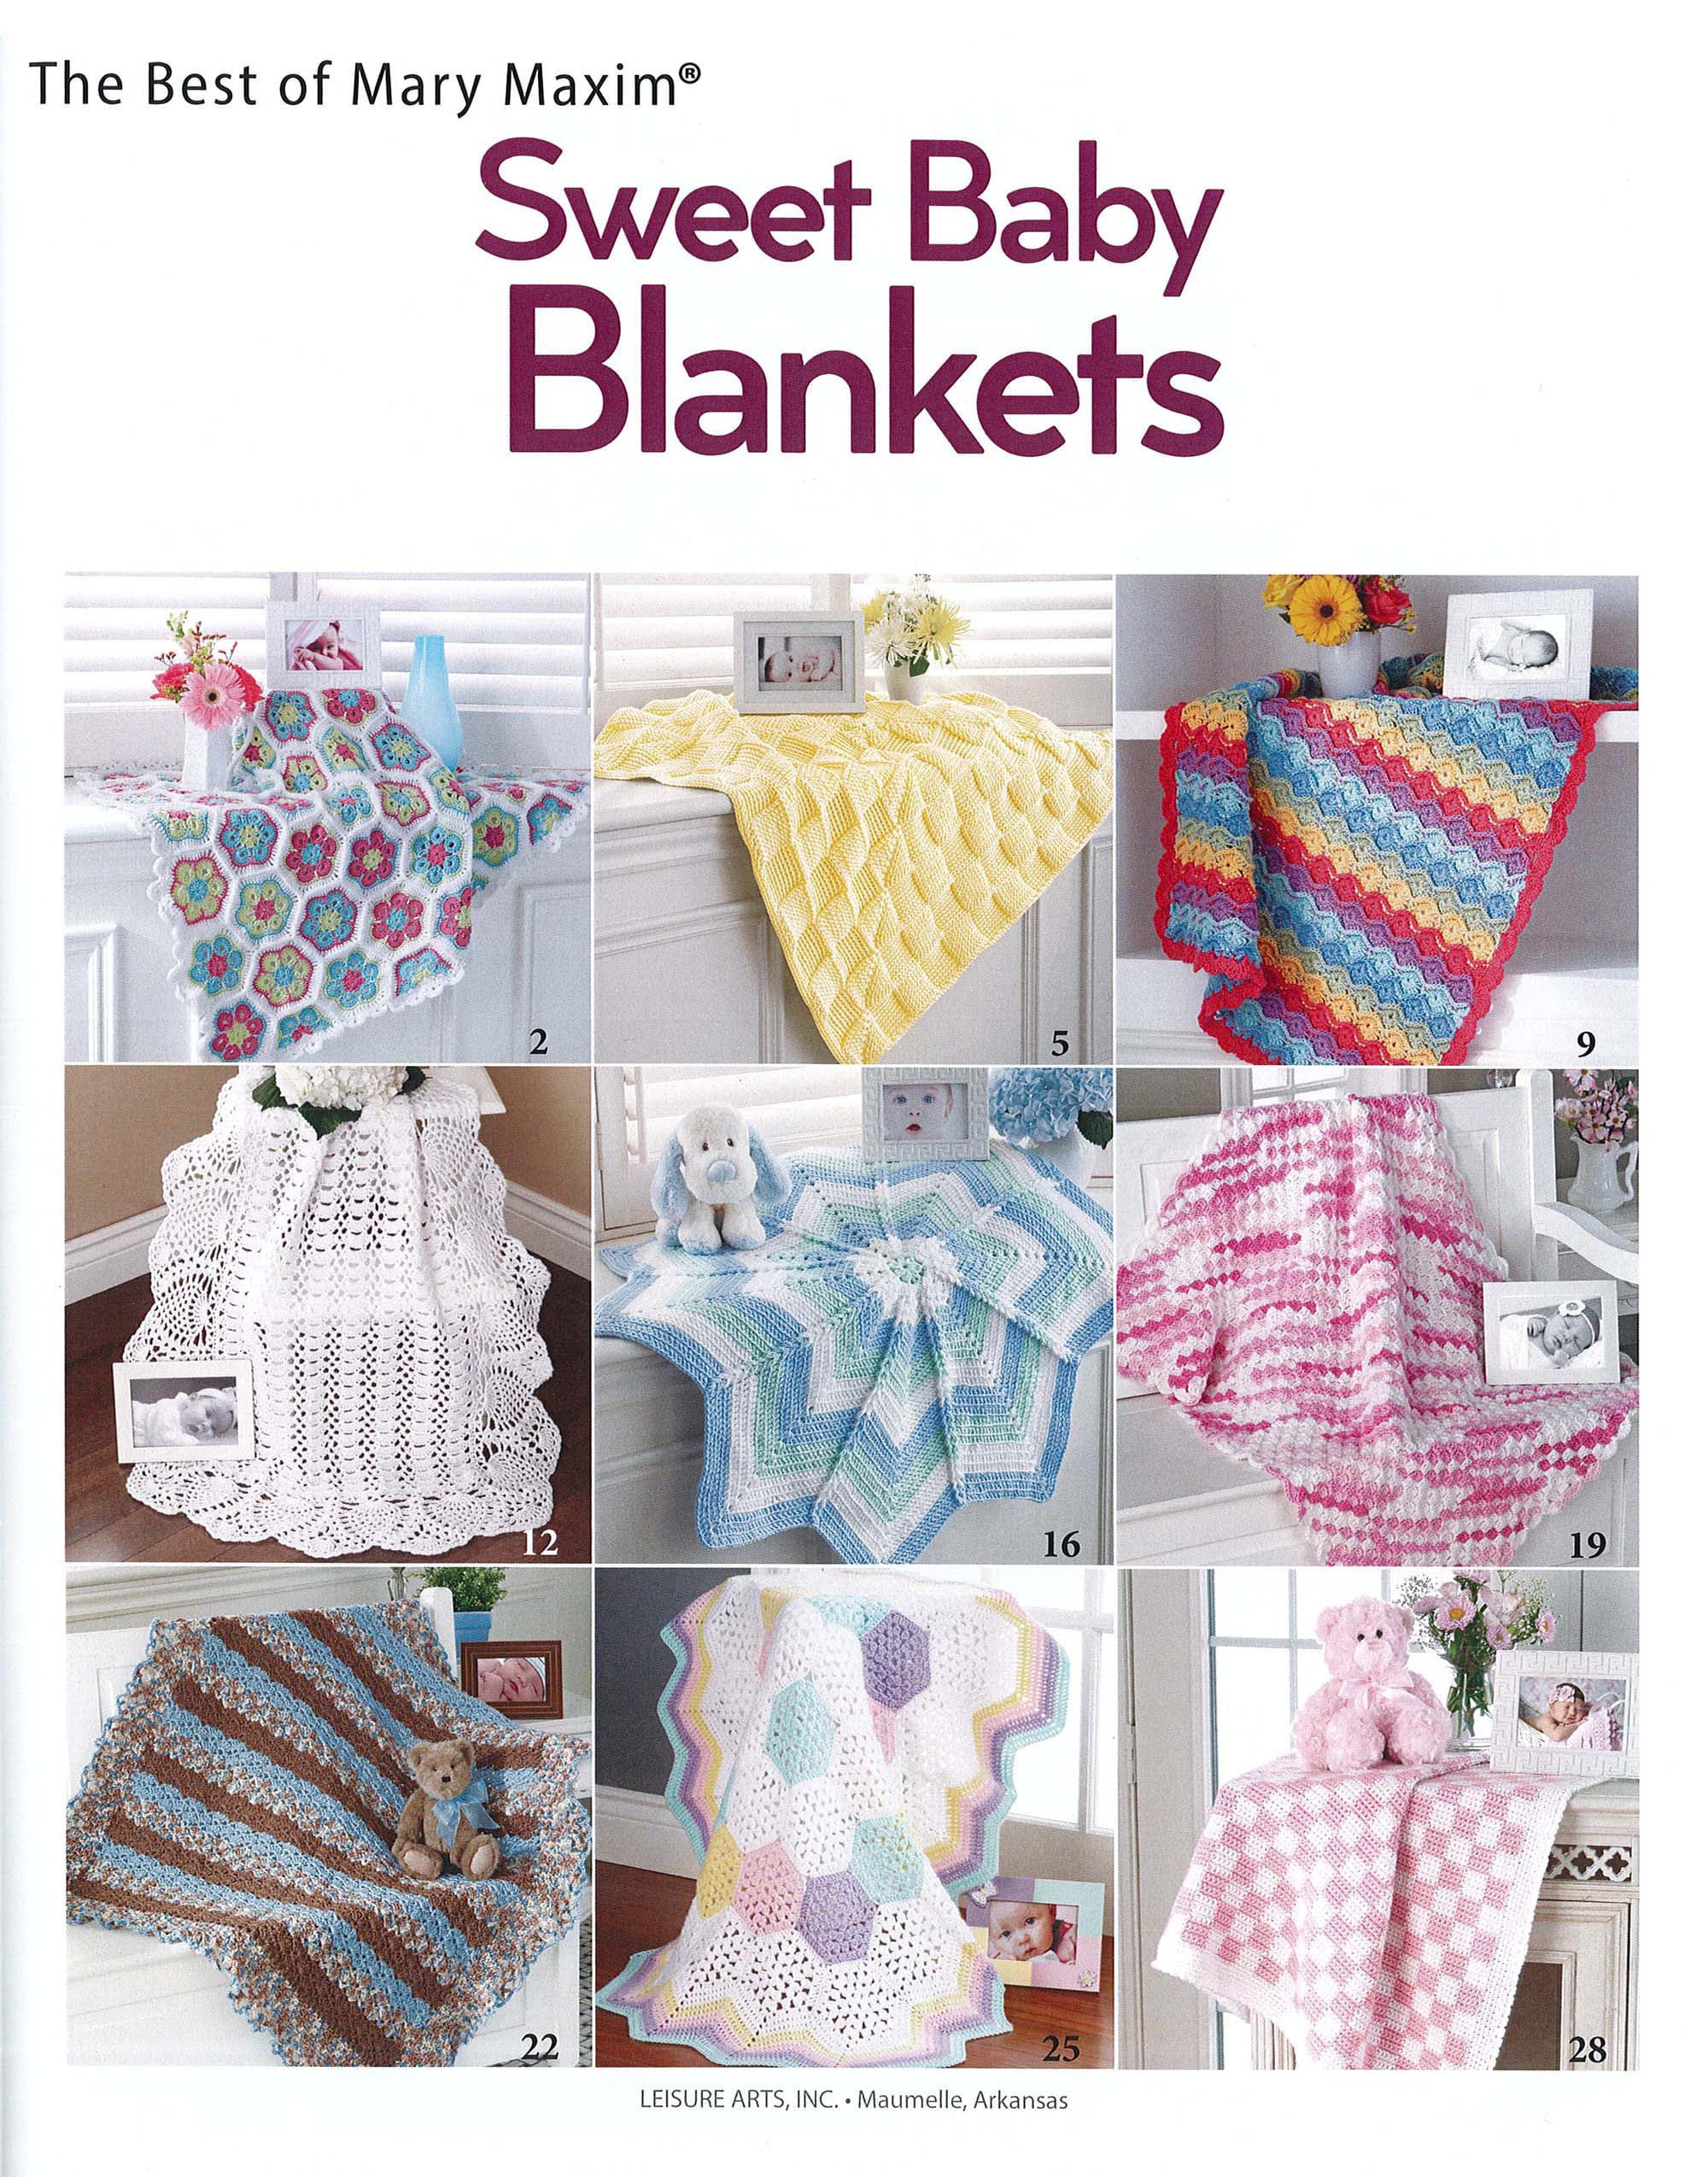 Leisure Arts (Sweet Baby Blankets- The BEST)